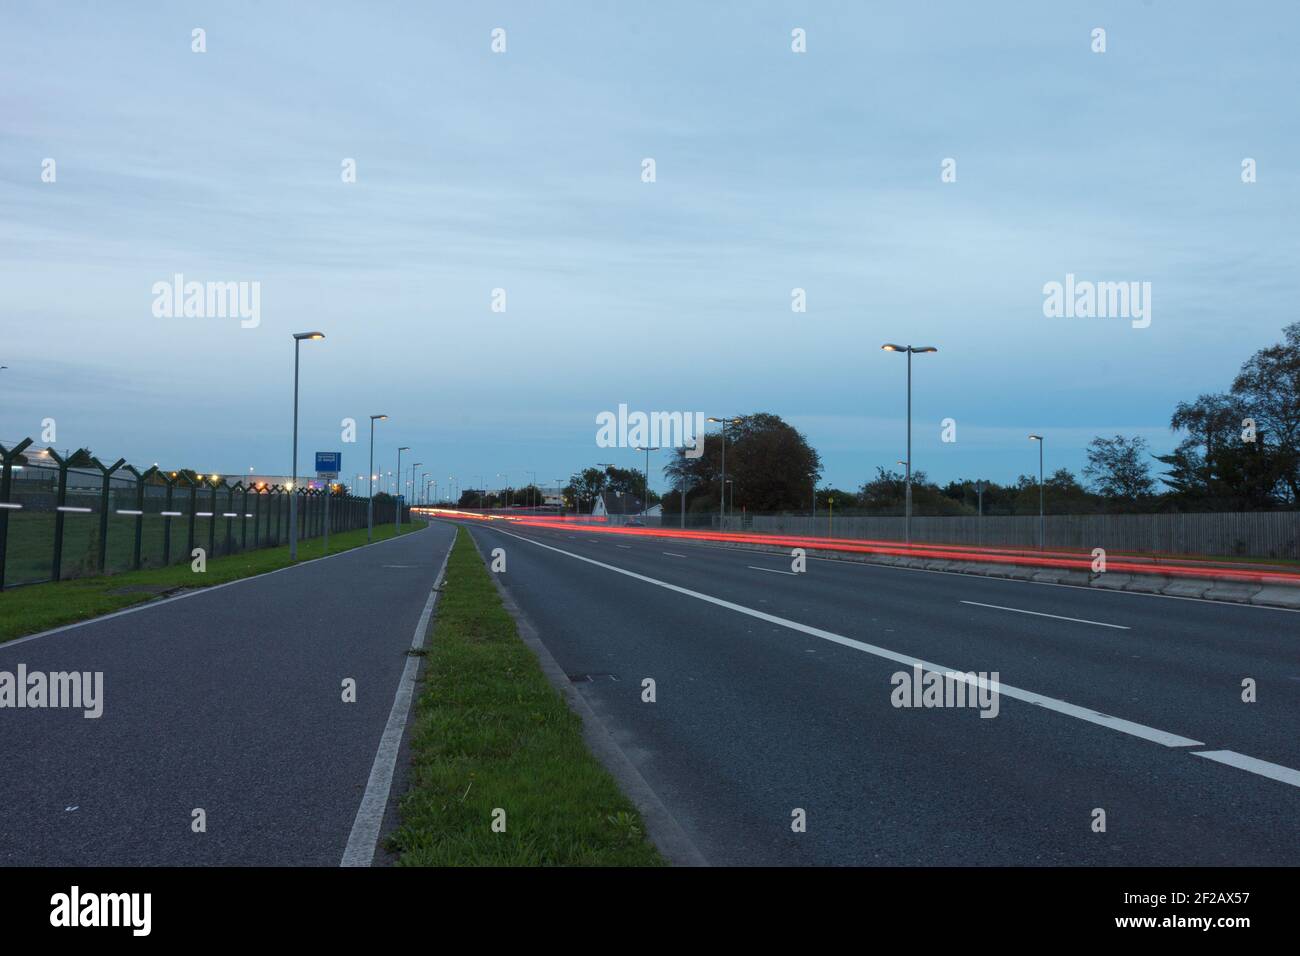 Road and Cars Light Trails, road, street, light, empty, red line, cycle lane, traffic, commuting, transportation, light trails Stock Photo